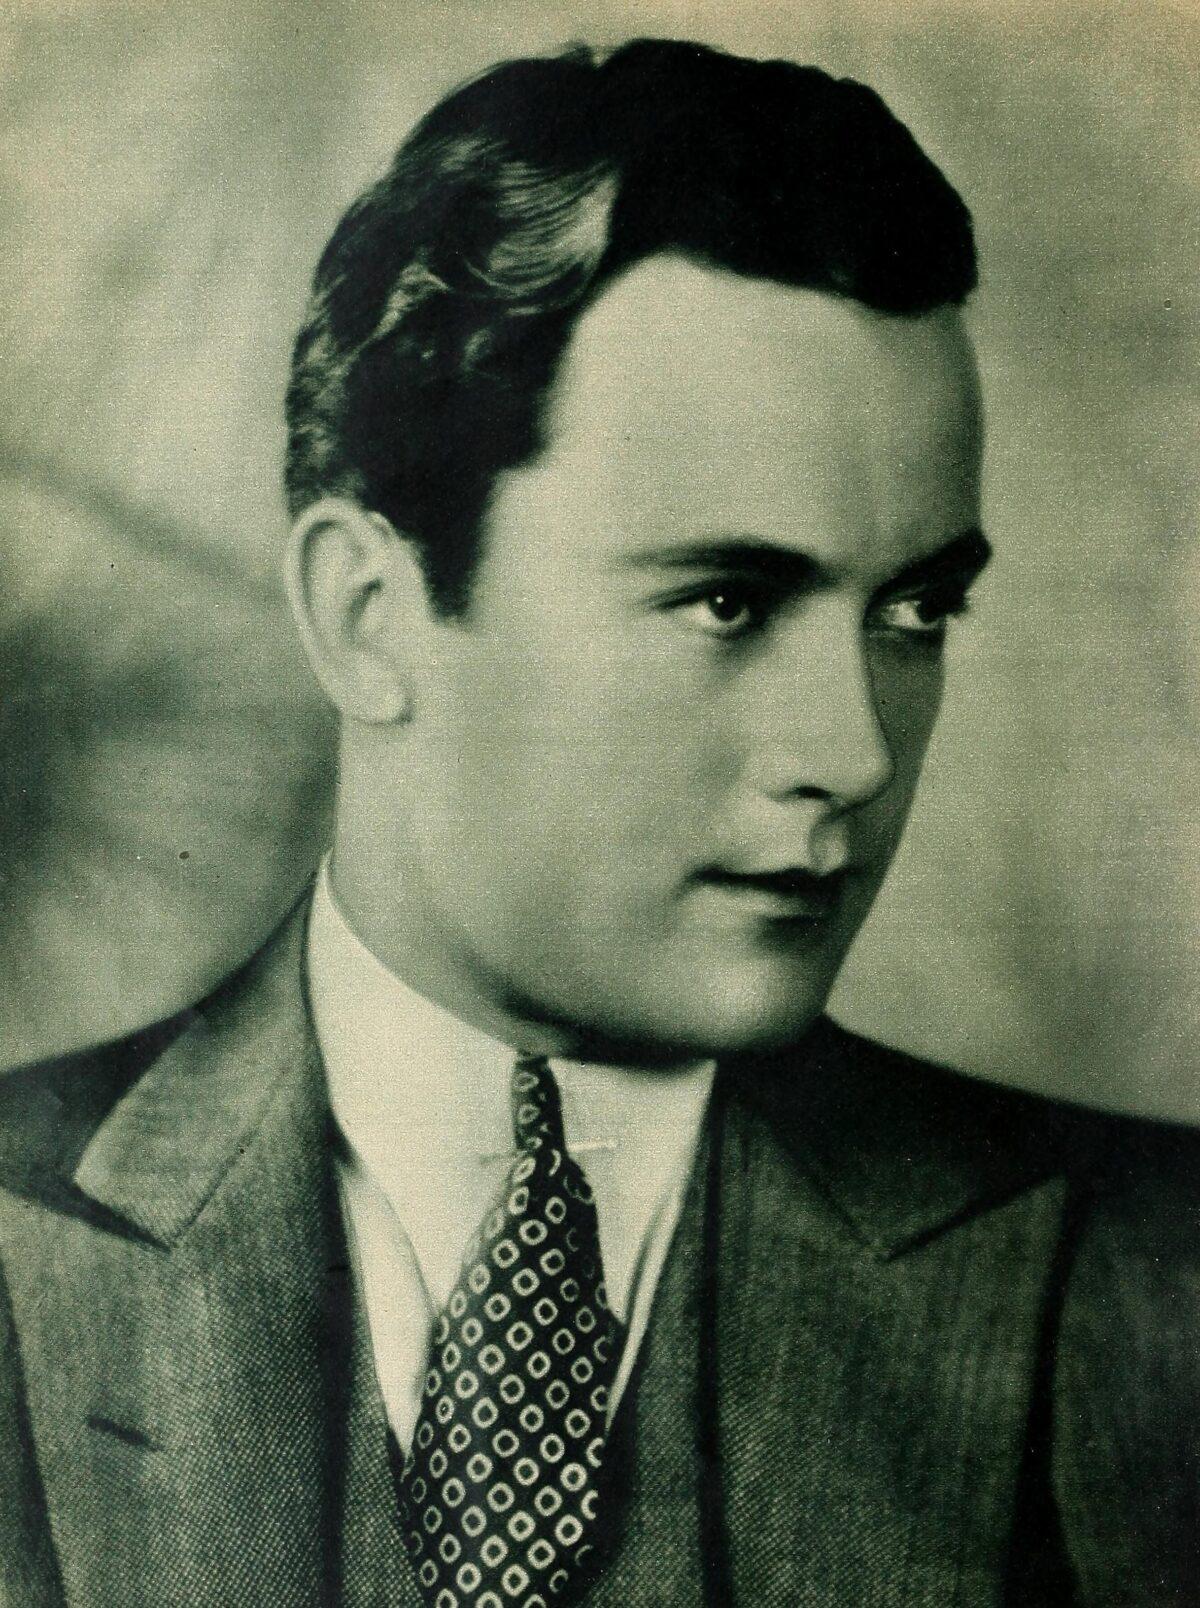 Actor Charles "Buddy" Rogers in 1928. (Public Domain)